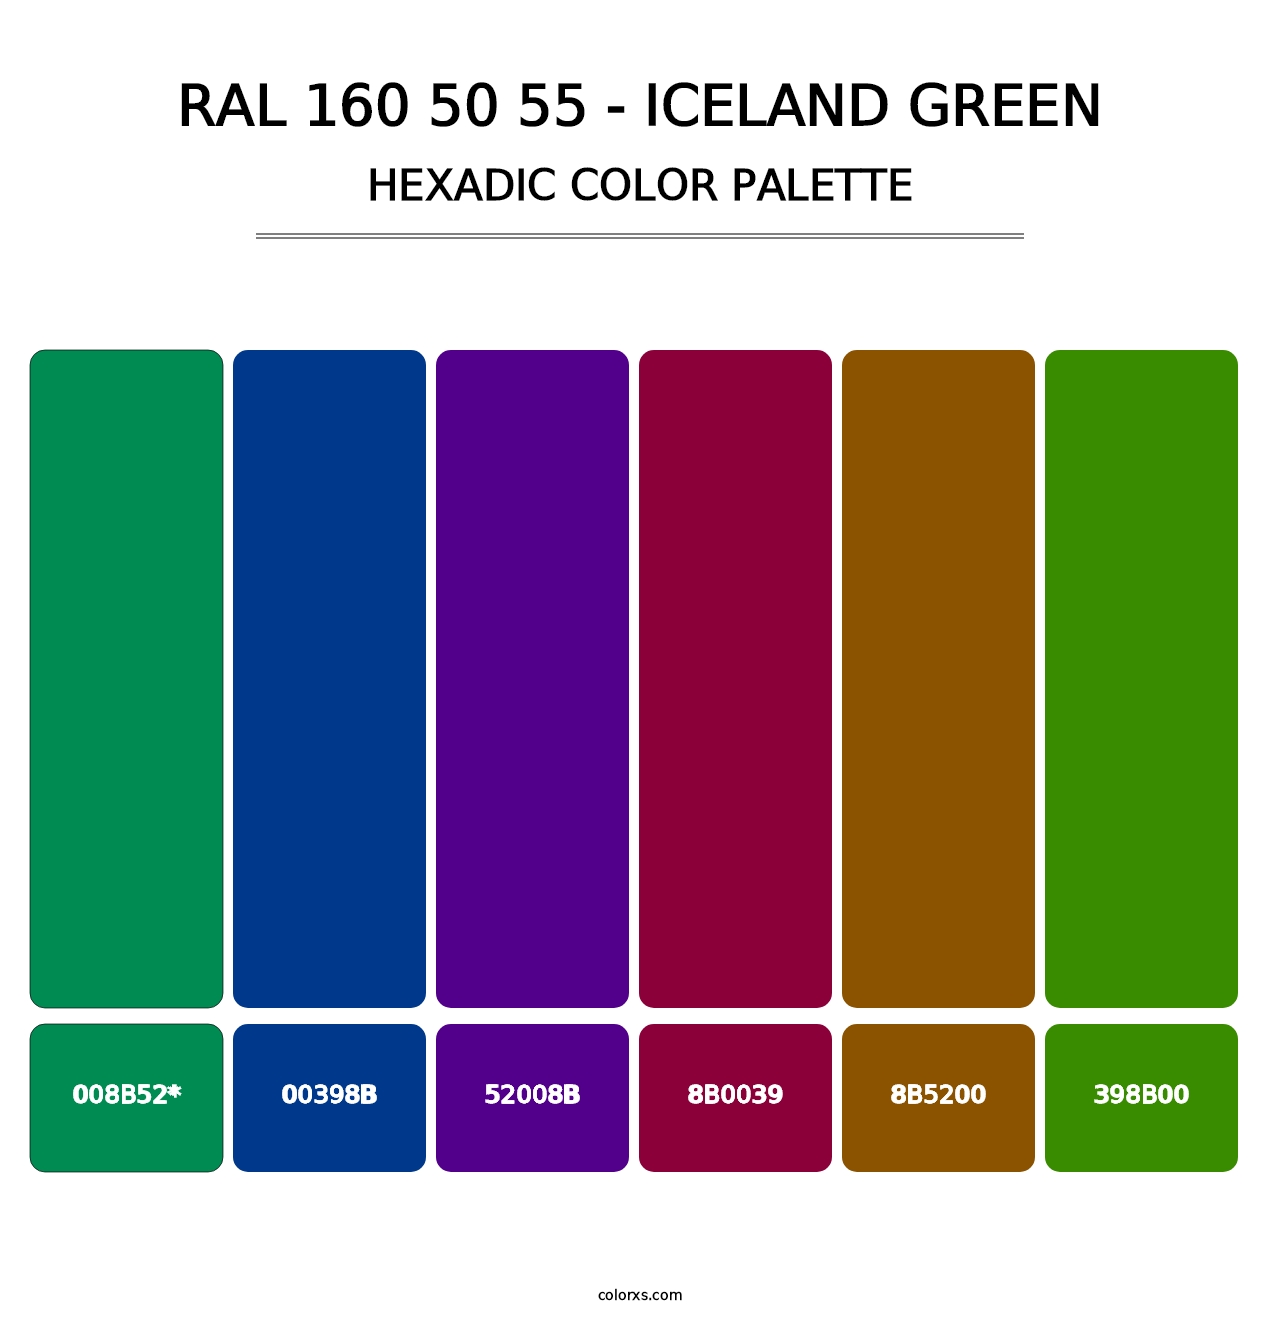 RAL 160 50 55 - Iceland Green - Hexadic Color Palette